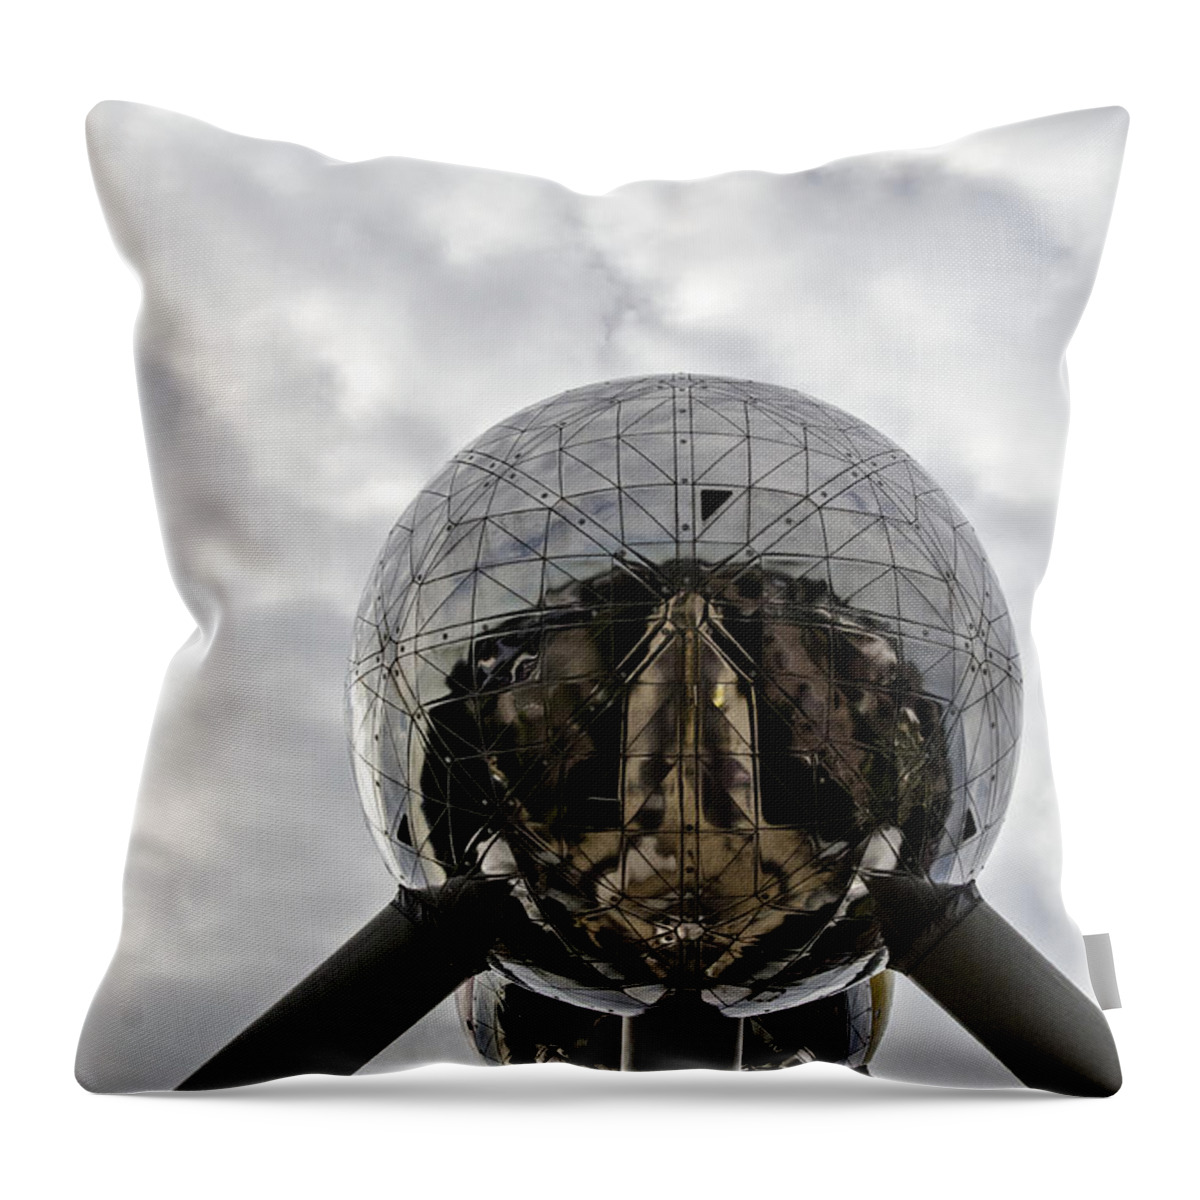 Atomium Throw Pillow featuring the photograph Atomium Spheres by Pravine Chester